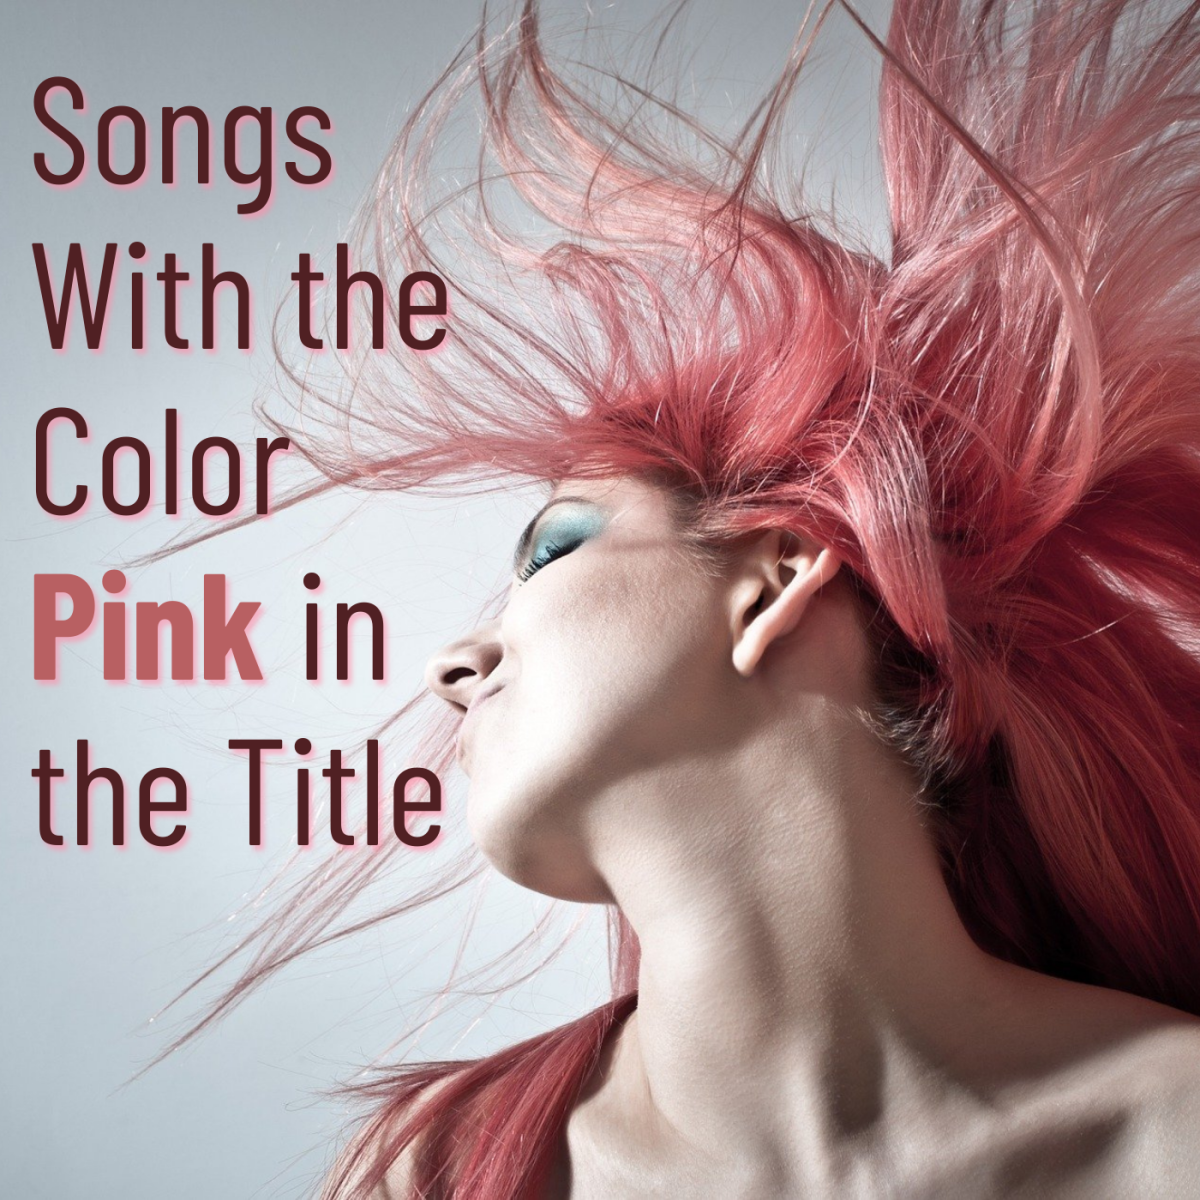 Depending on its shade, pink can symbolize nurturing, femininity, girly youth, love, or sensuality. Celebrate the diversity of the color pink with a playlist of pop, rock, country, metal, and R&B songs with the color pink in the title.